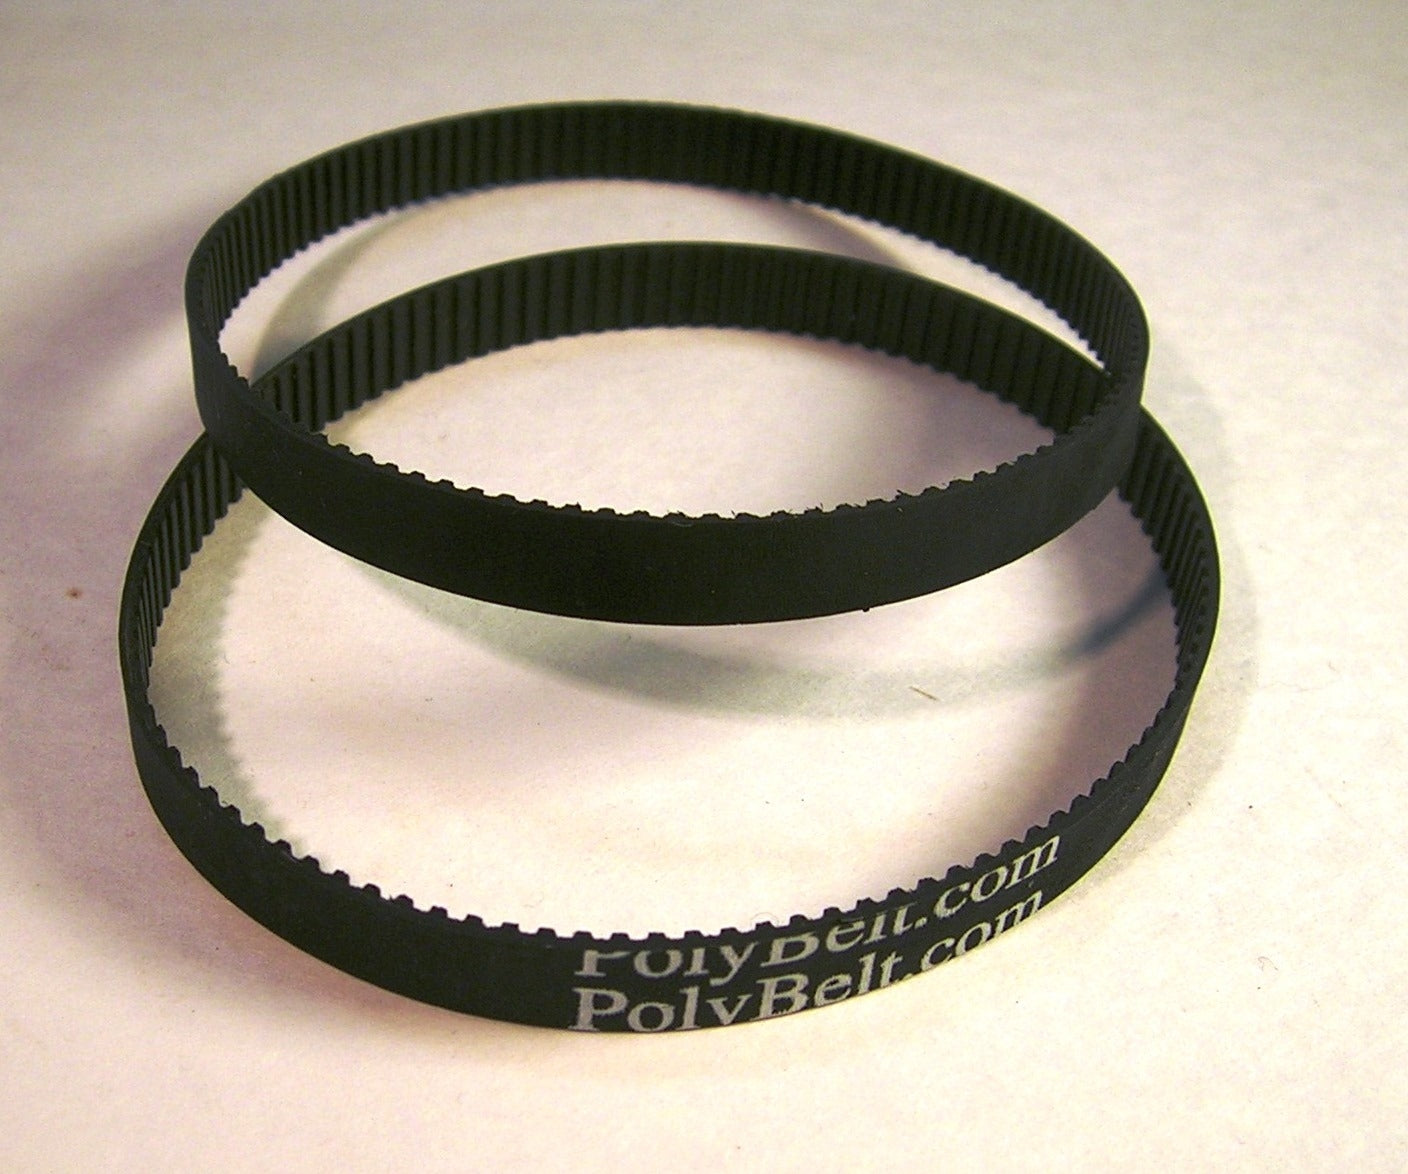 Replacement Toothed Drive Belt for DYSON DC-17 Vacuum